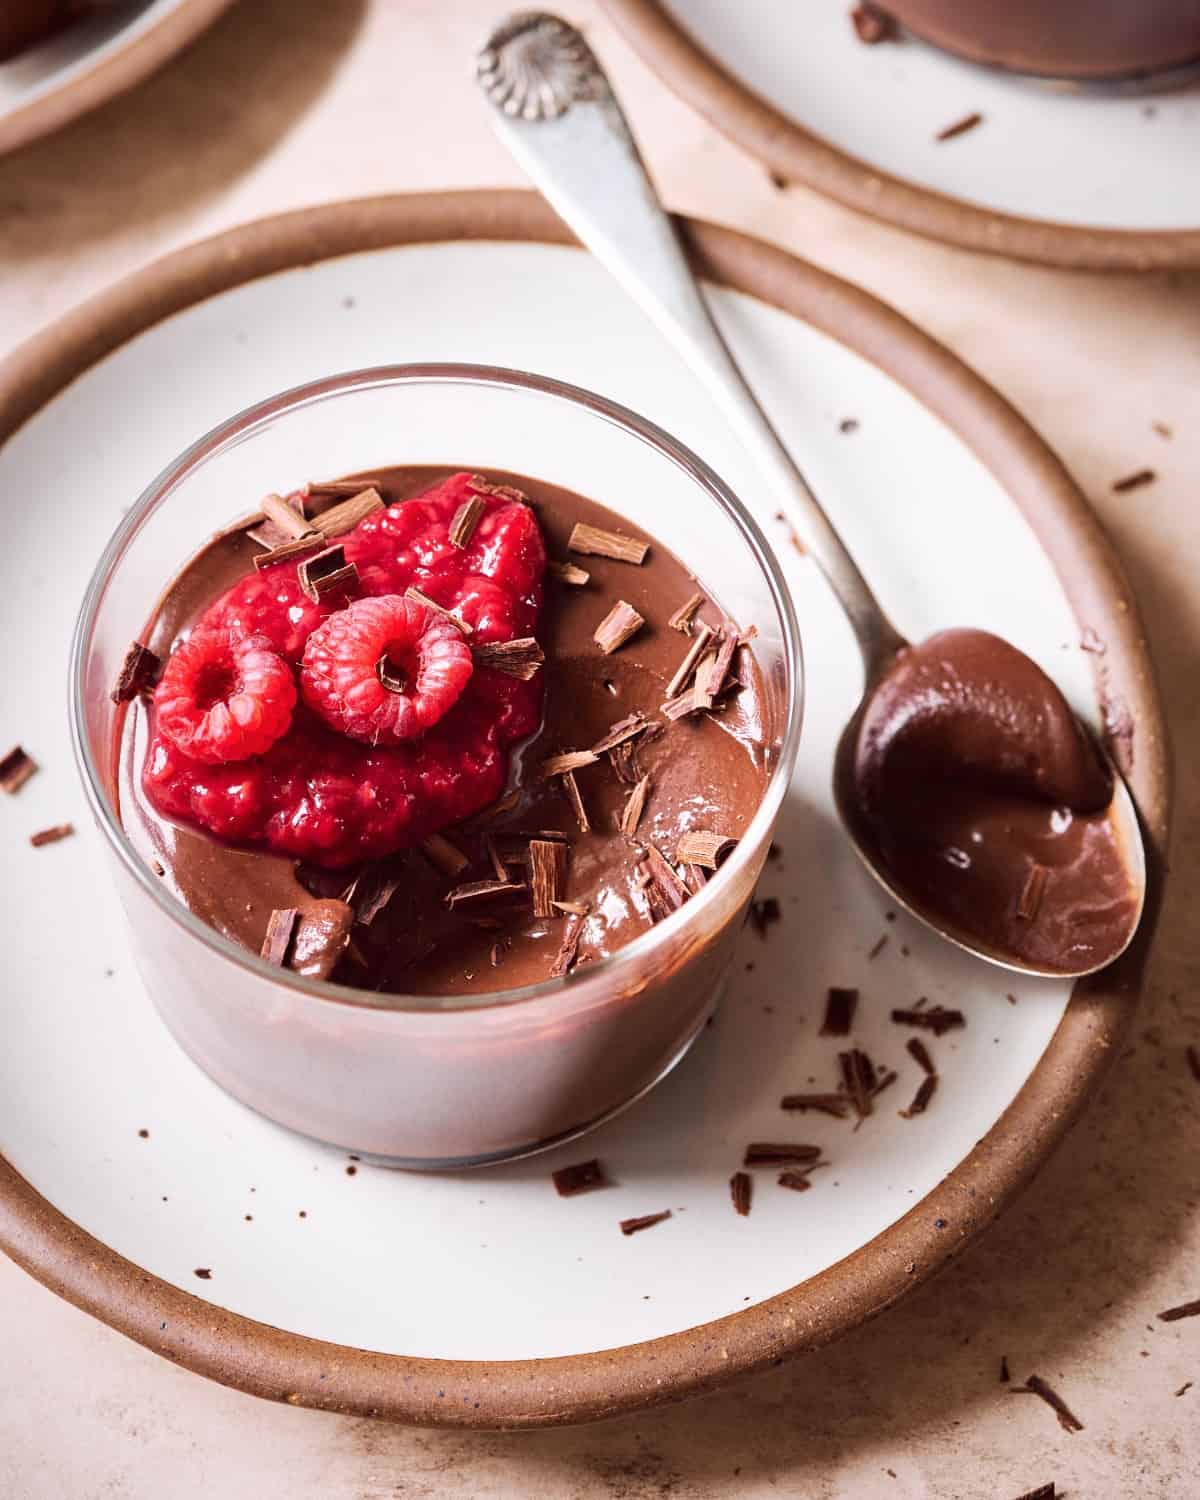 Chocolate mousse with raspberry compote and raspberries in glass ramekin on white plate.